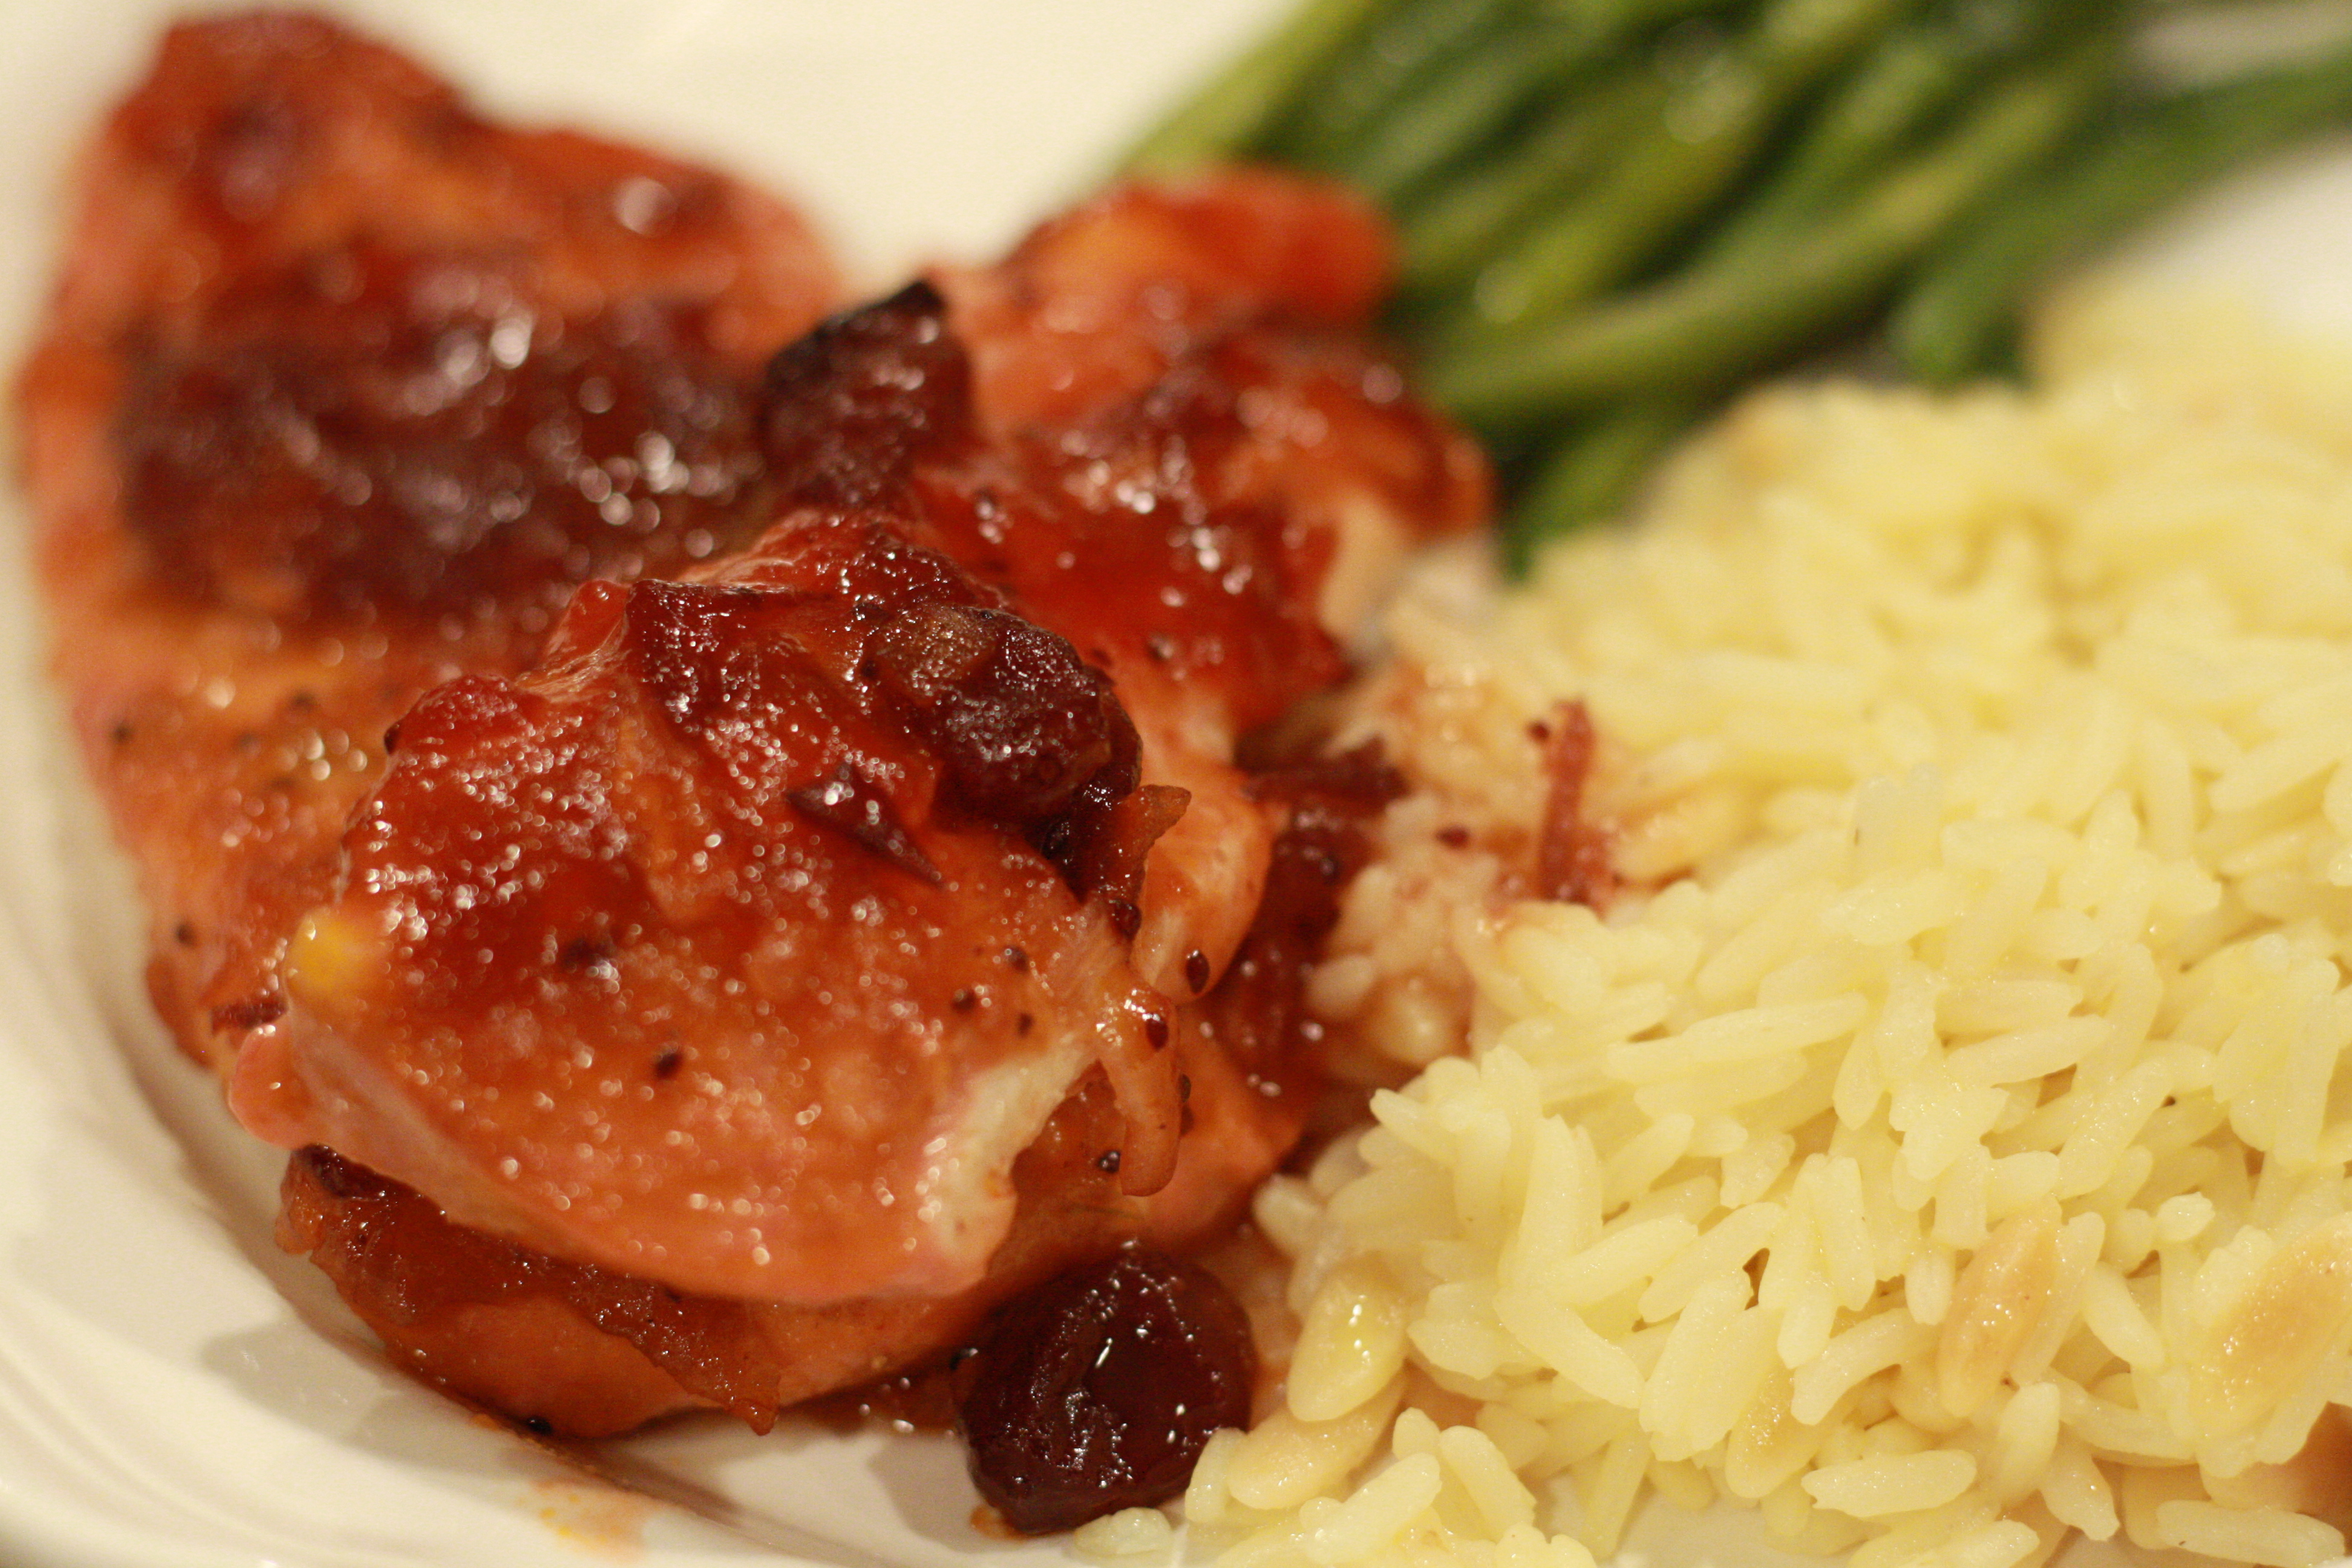 Easy Weeknight Meal: Cranberry Baked Chicken with Hannaford ingredients